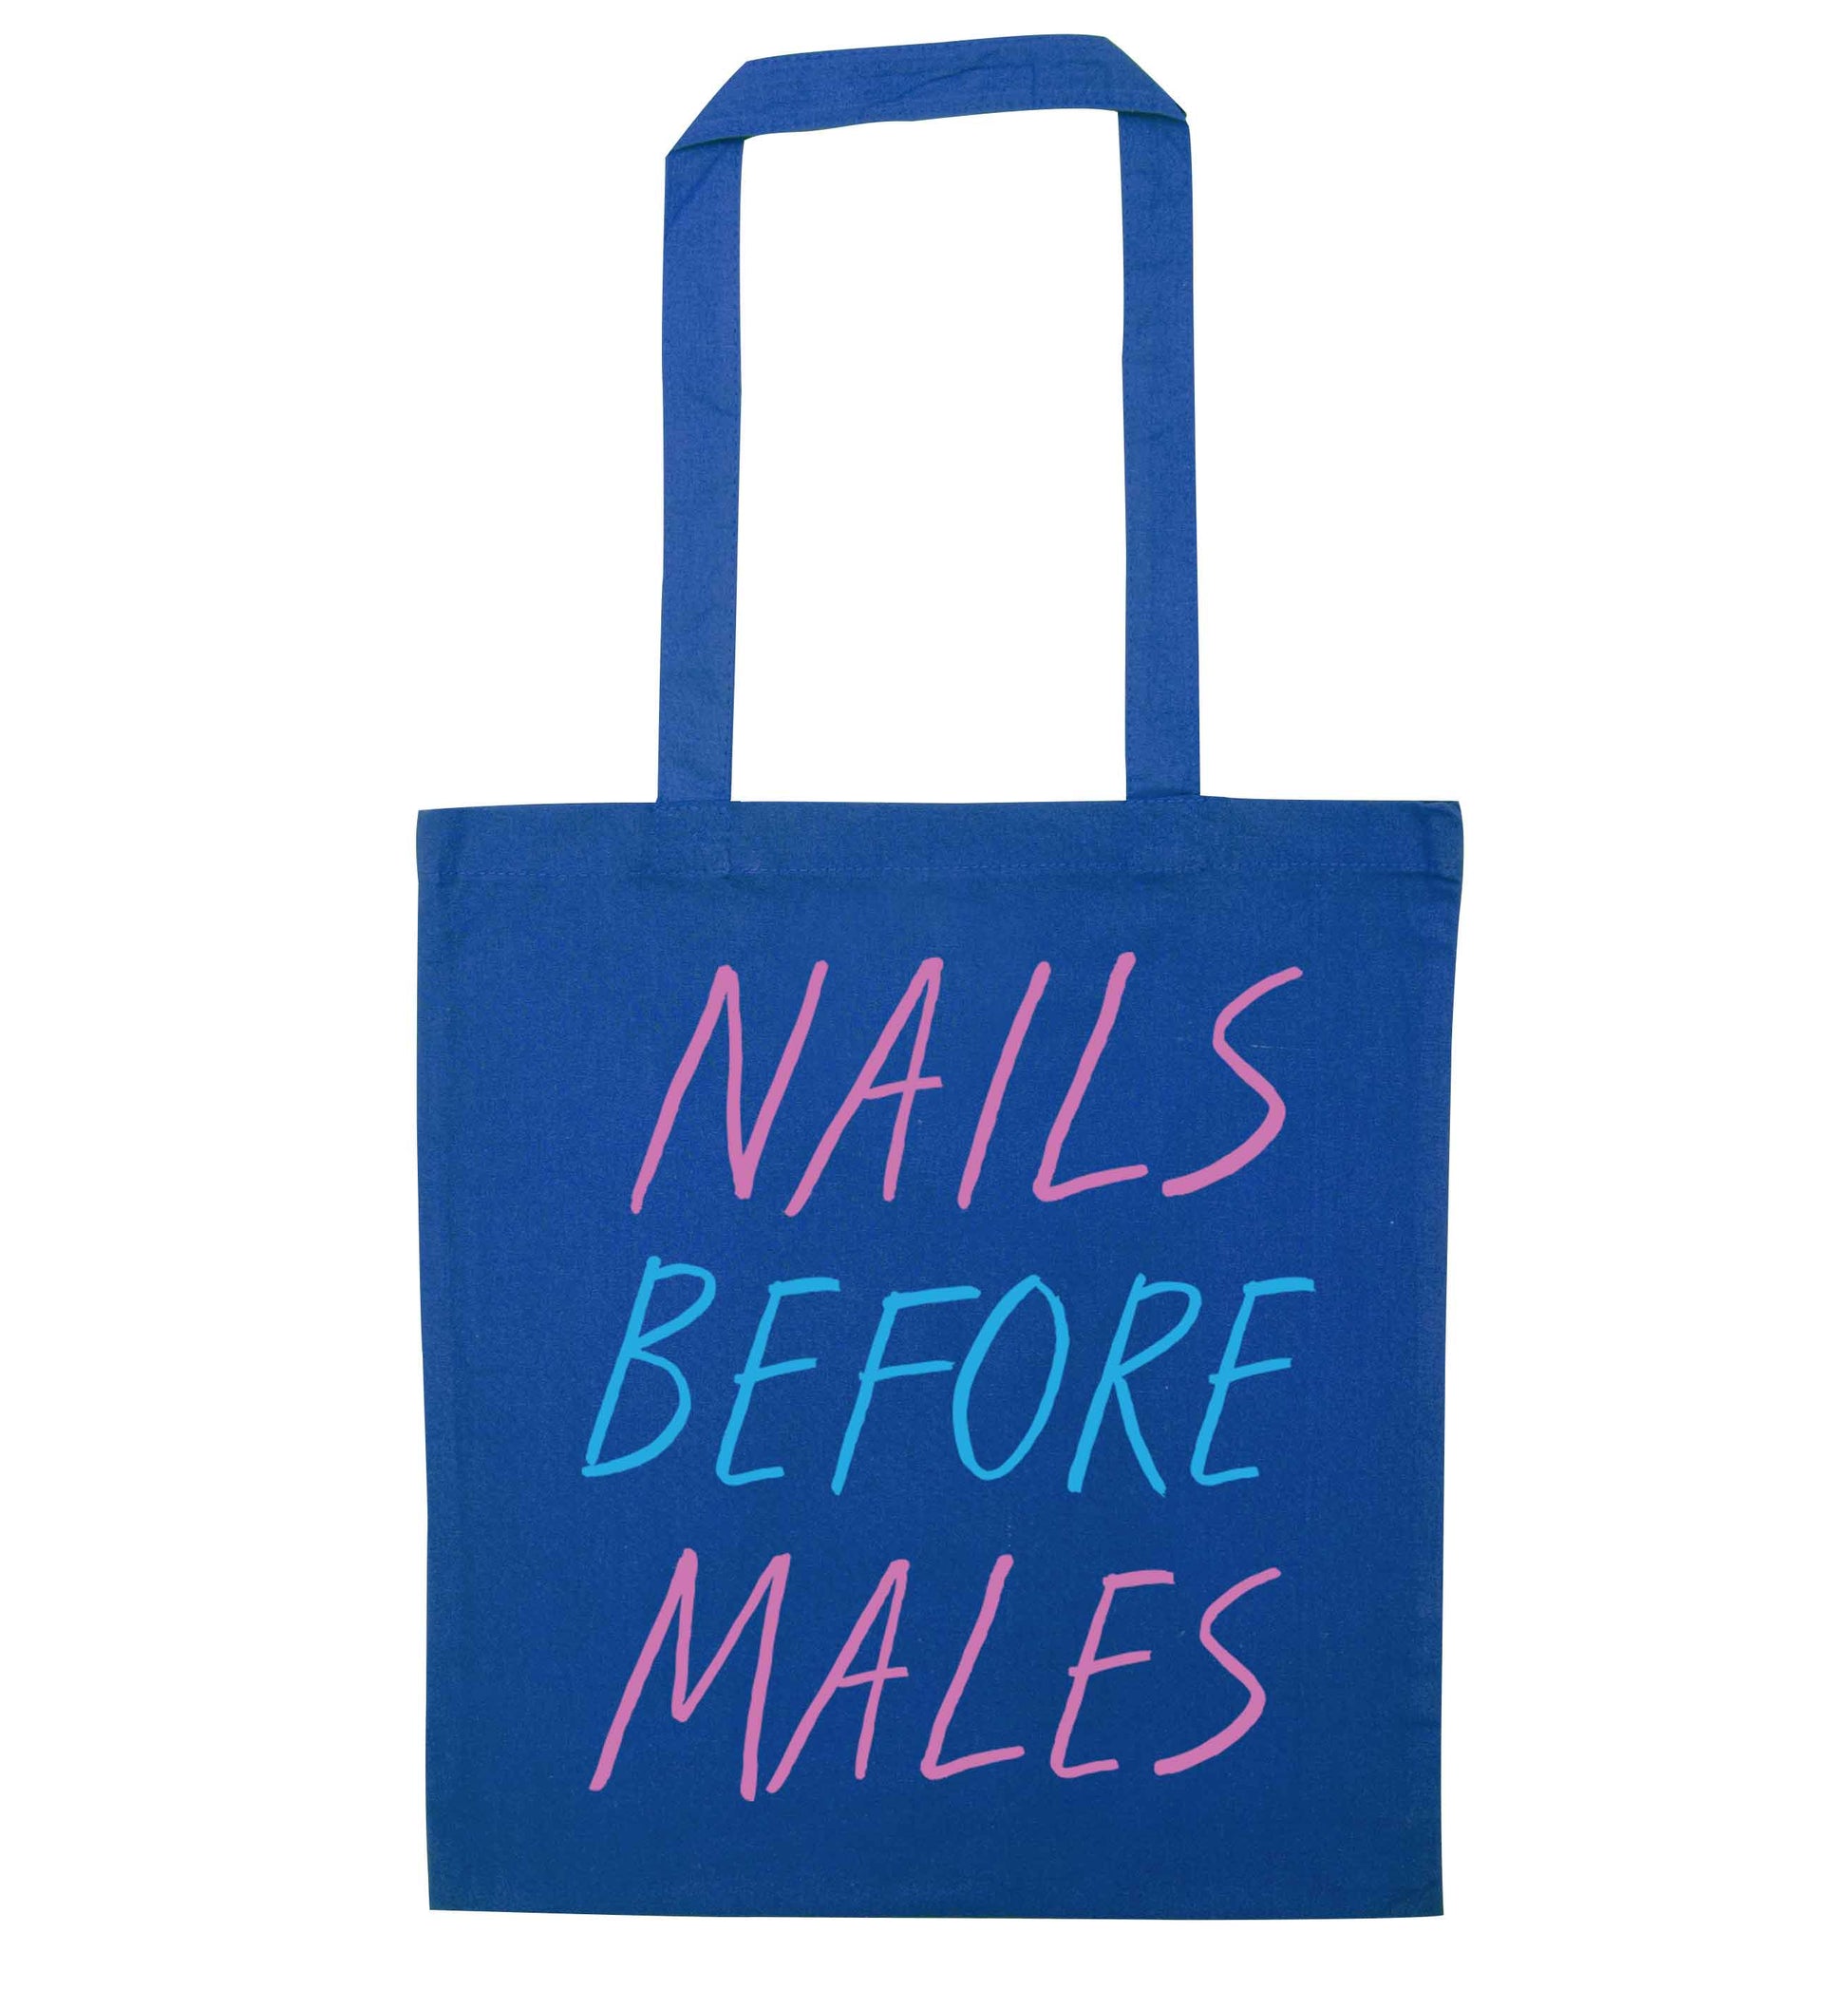 Nails before males blue tote bag